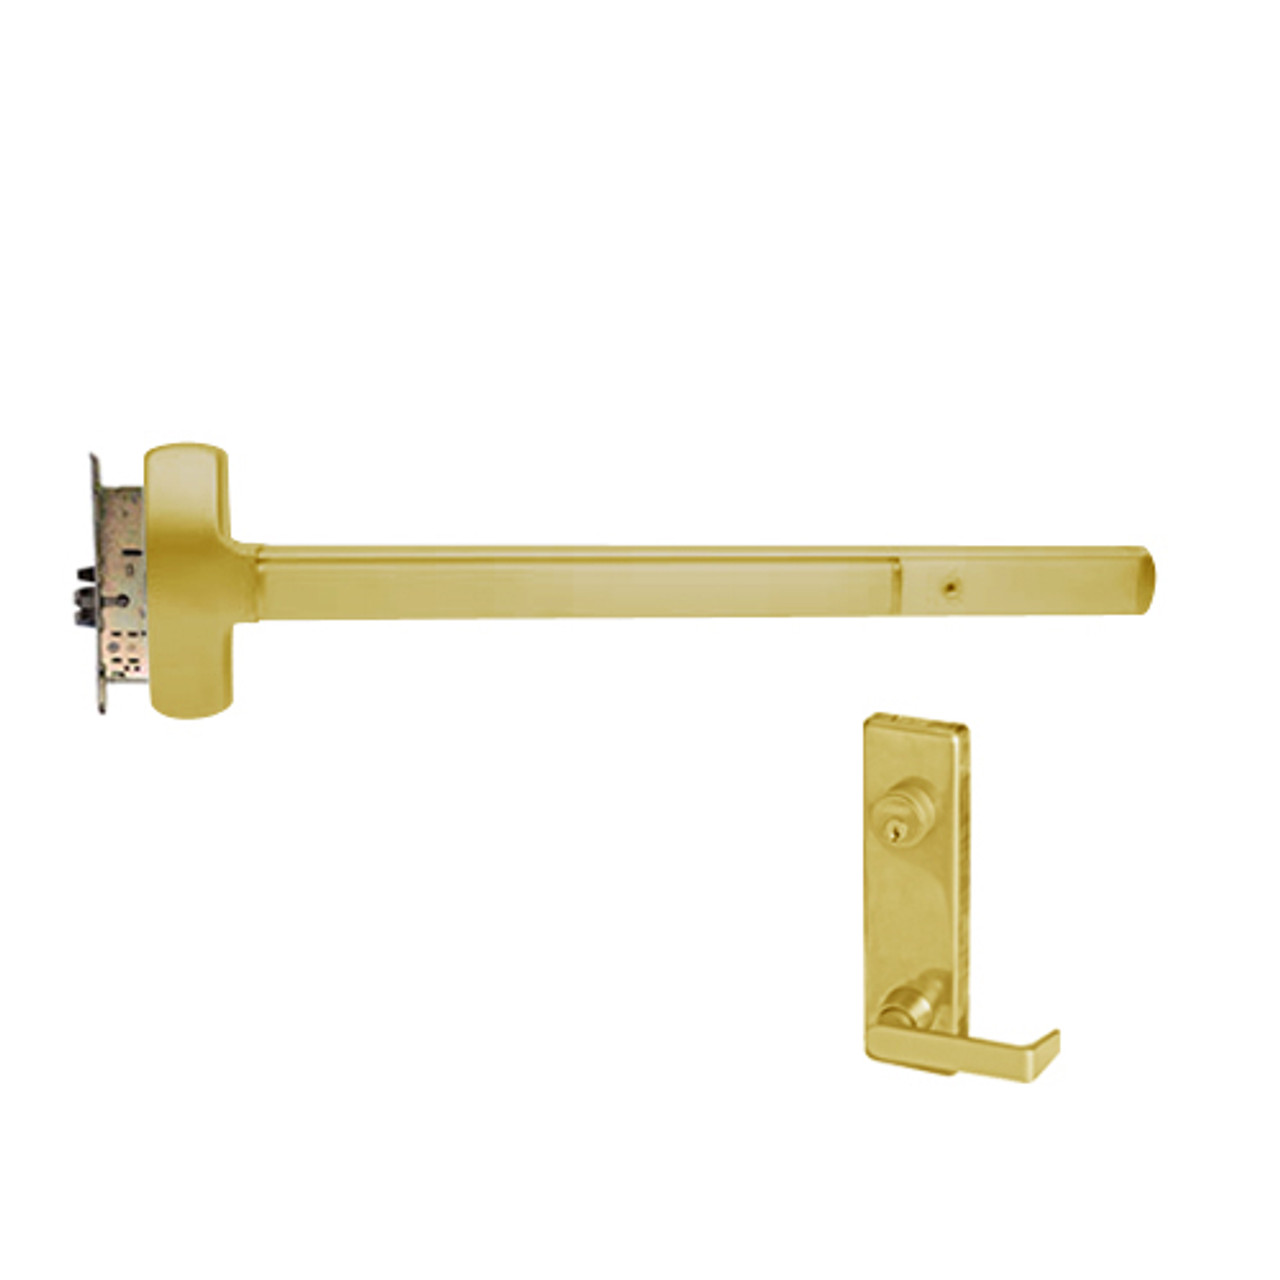 25-M-L-DANE-US3-3-LHR Falcon Exit Device in Polished Brass